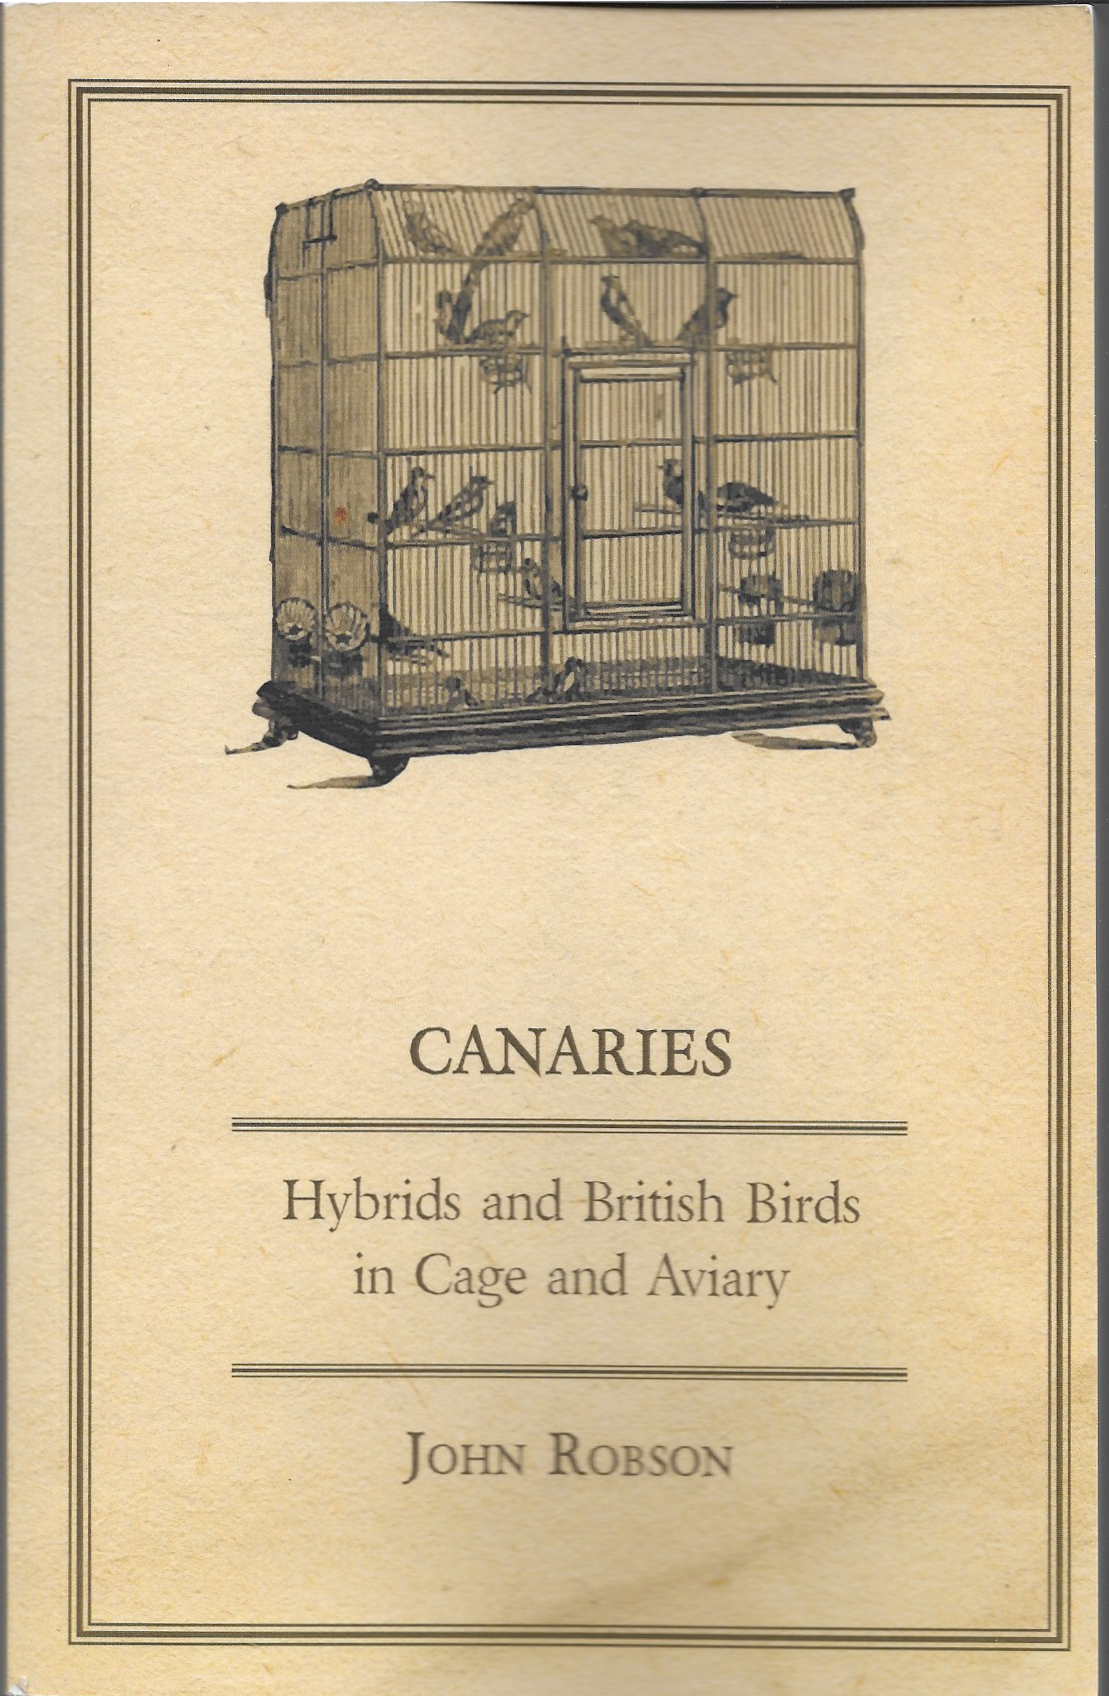 CANARIES